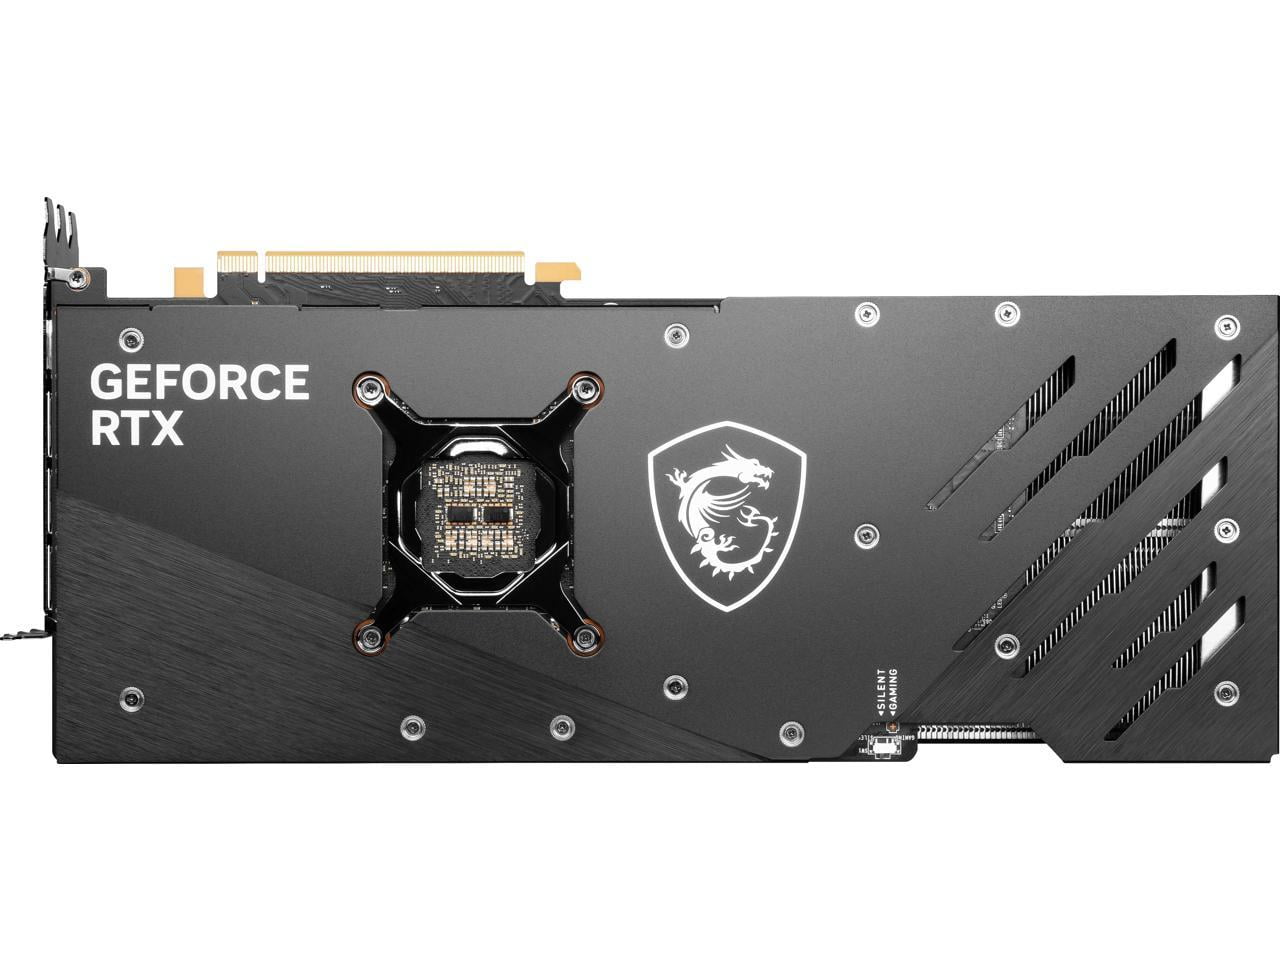 MSI GeForce RTX 4080 16GB GAMING X TRIO Graphics Card - DirectX 12 Ultimate  Supported - G-Sync Compatible - HDCP Supported - TORX Fan 5.0 Cooling  System - 16 GB GDDR6X Memory 